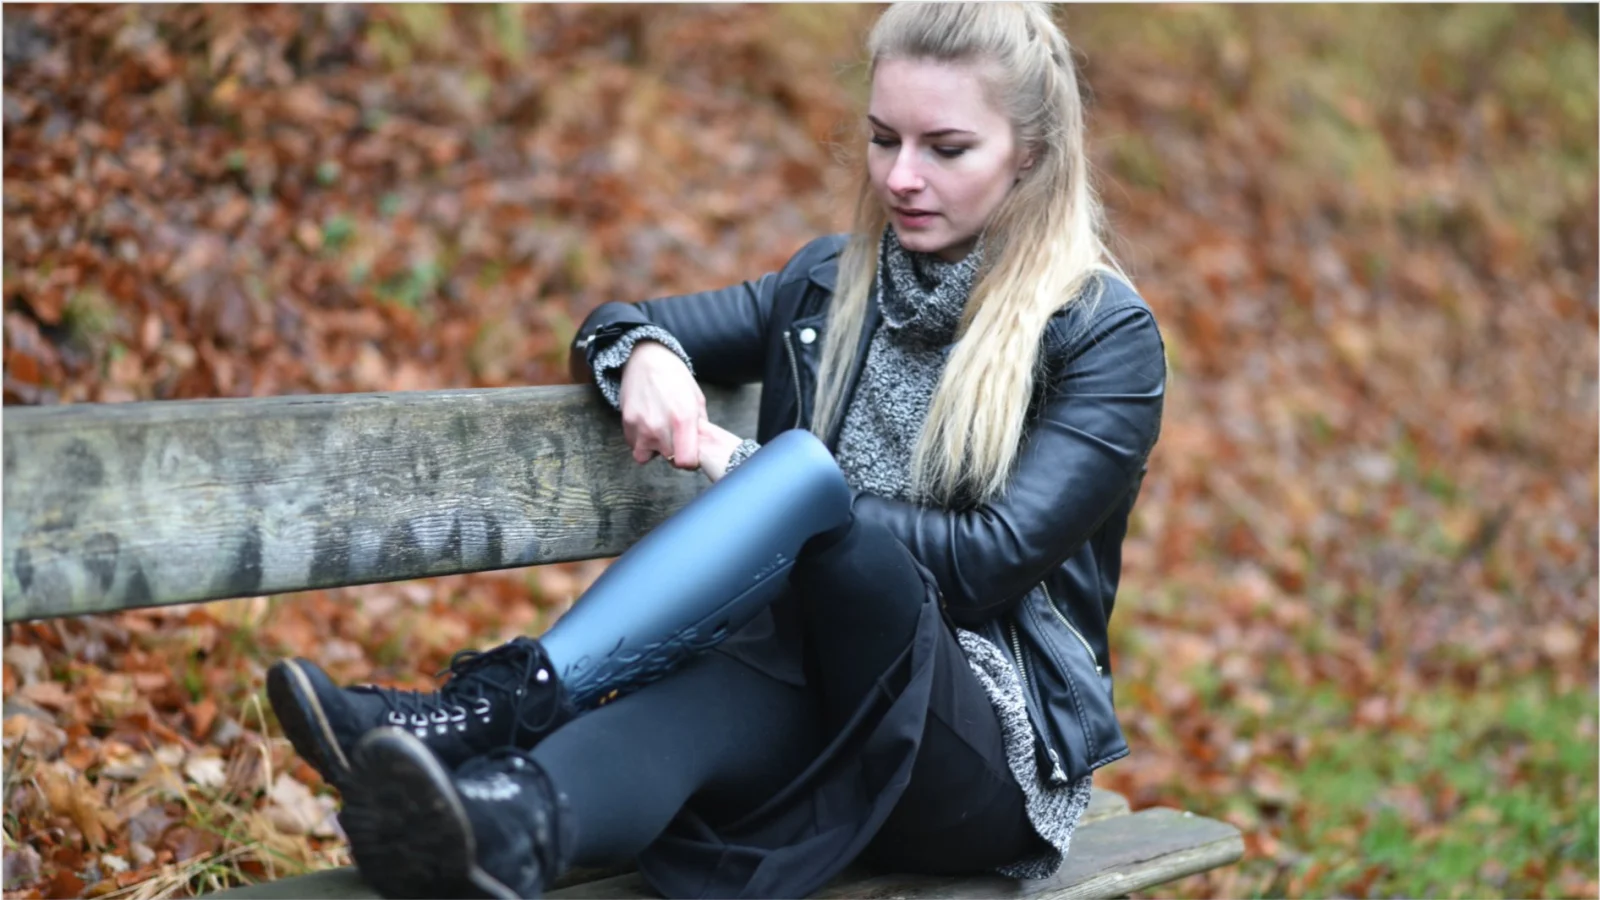 Girl wearing a grey prosthetic cover sitting on a wooden bench